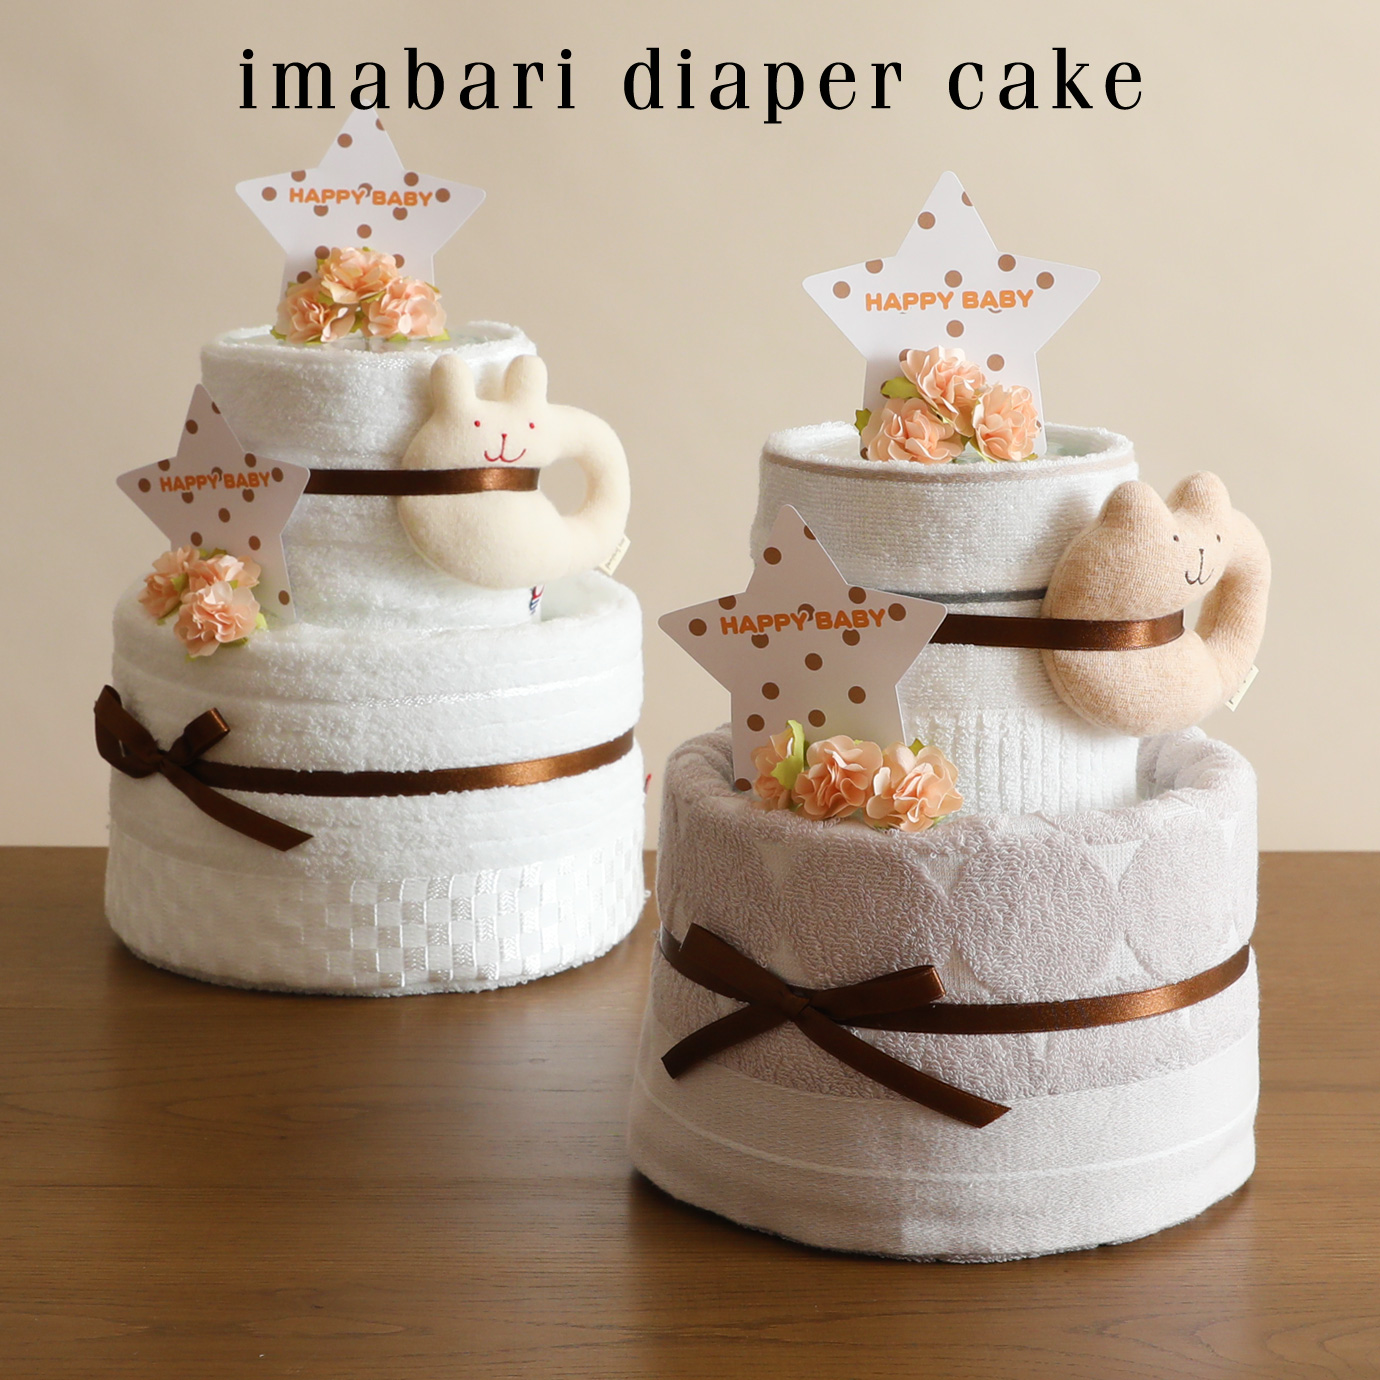  diapers cake now . towel celebration of a birth organic made in Japan name entering 2 step bath towel large pa- cake man girl baby baby Father's day present 